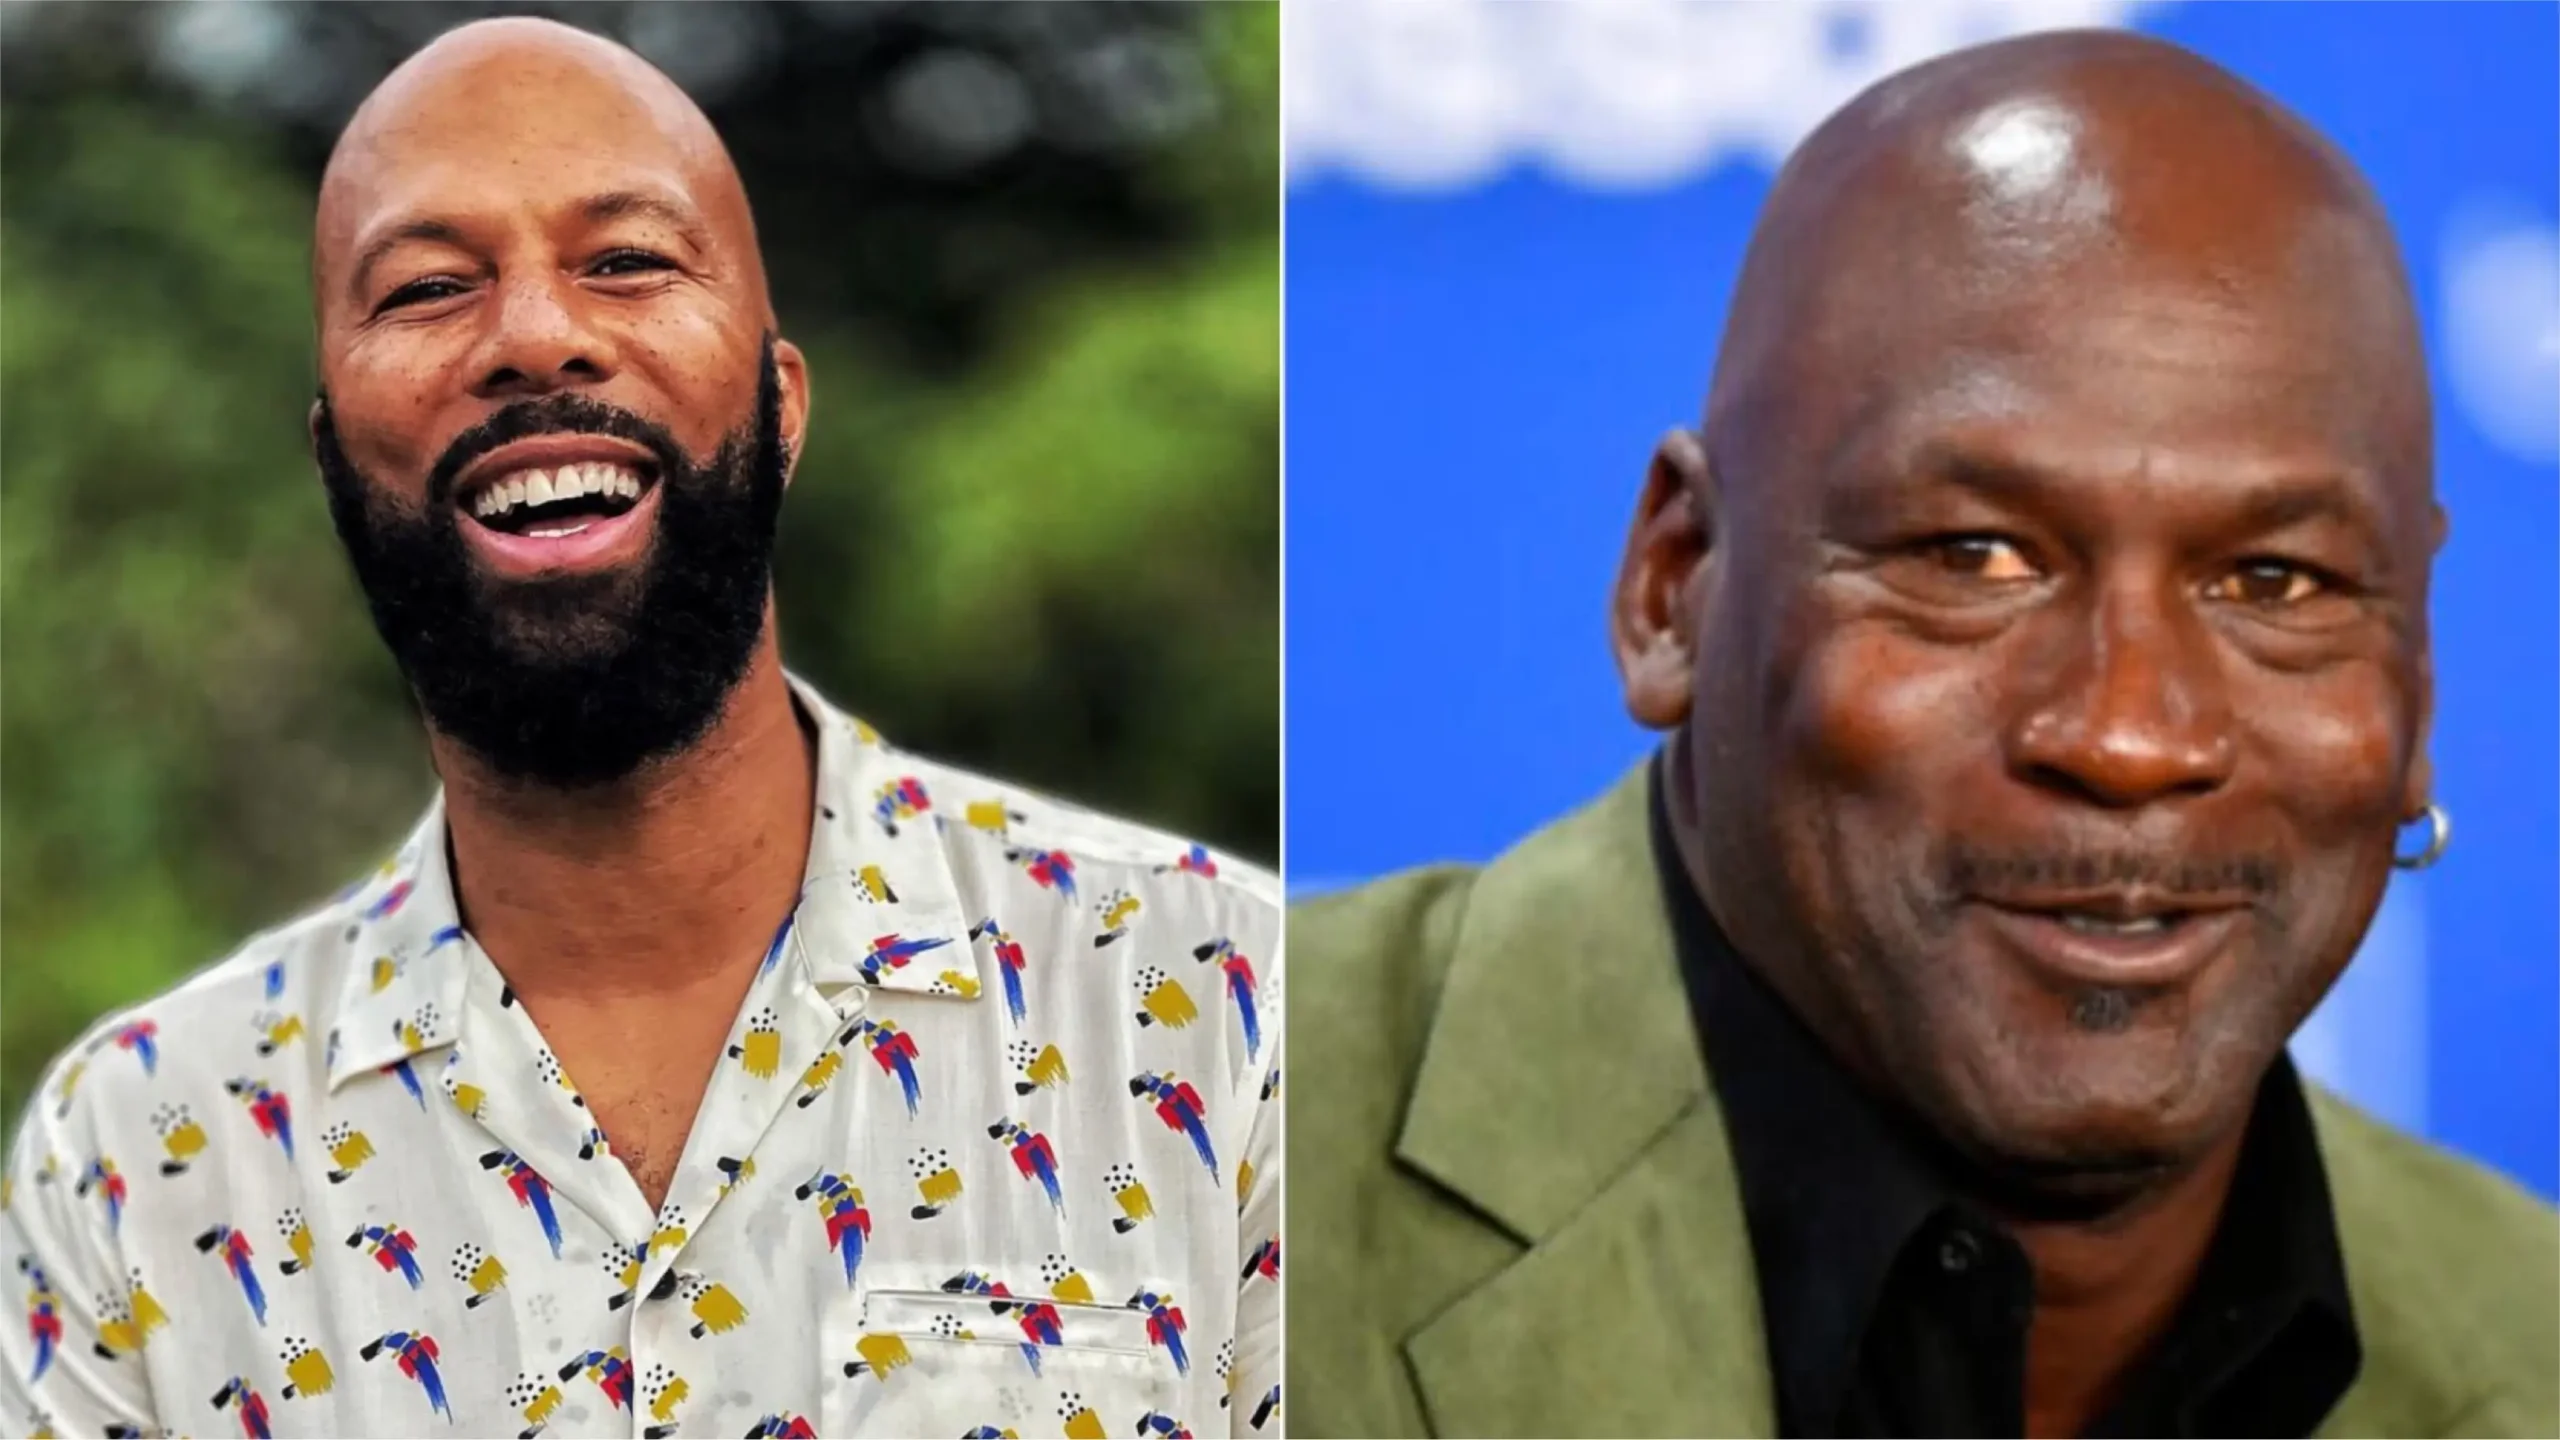 ‘He Crushed Me, Man’: Michael Jordan Shuts Down Common’s ‘Just Wright’ Hoop Dreams and Tells Him to ‘Stick to Rapping and Acting,’ Actor Recalls